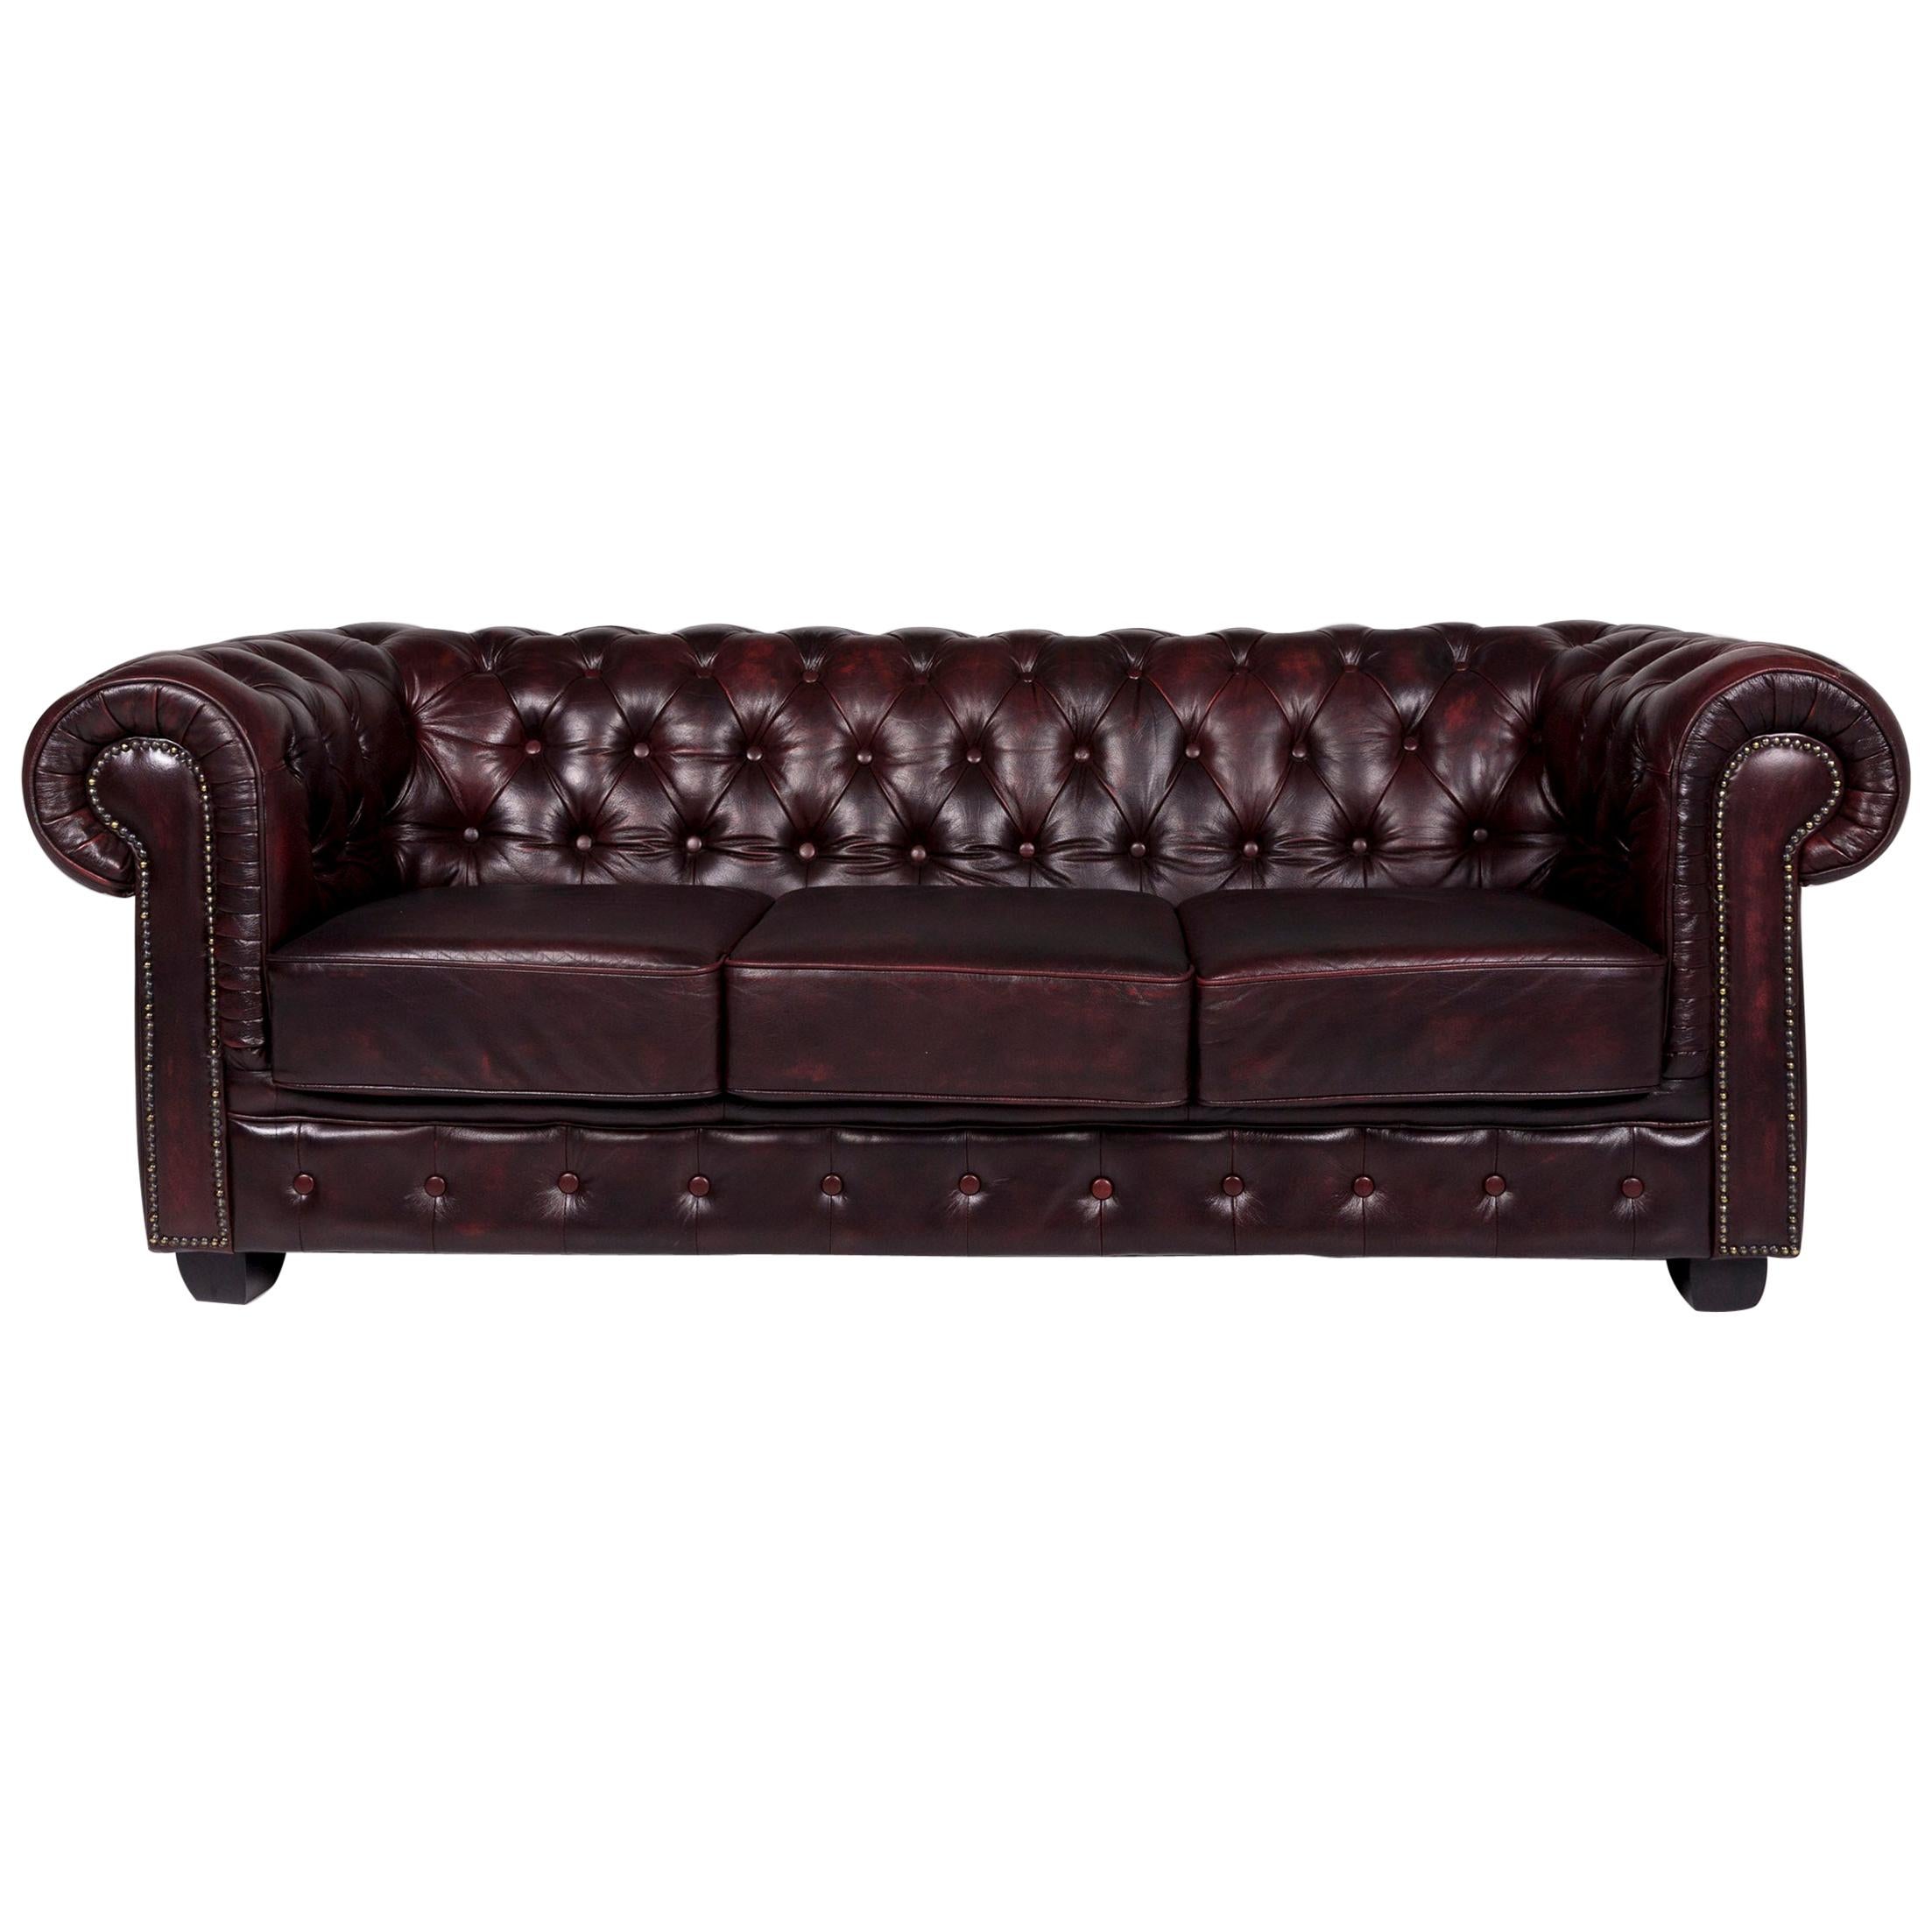 Chesterfield Leather Sofa Red Brown Three-Seat Retro Couch